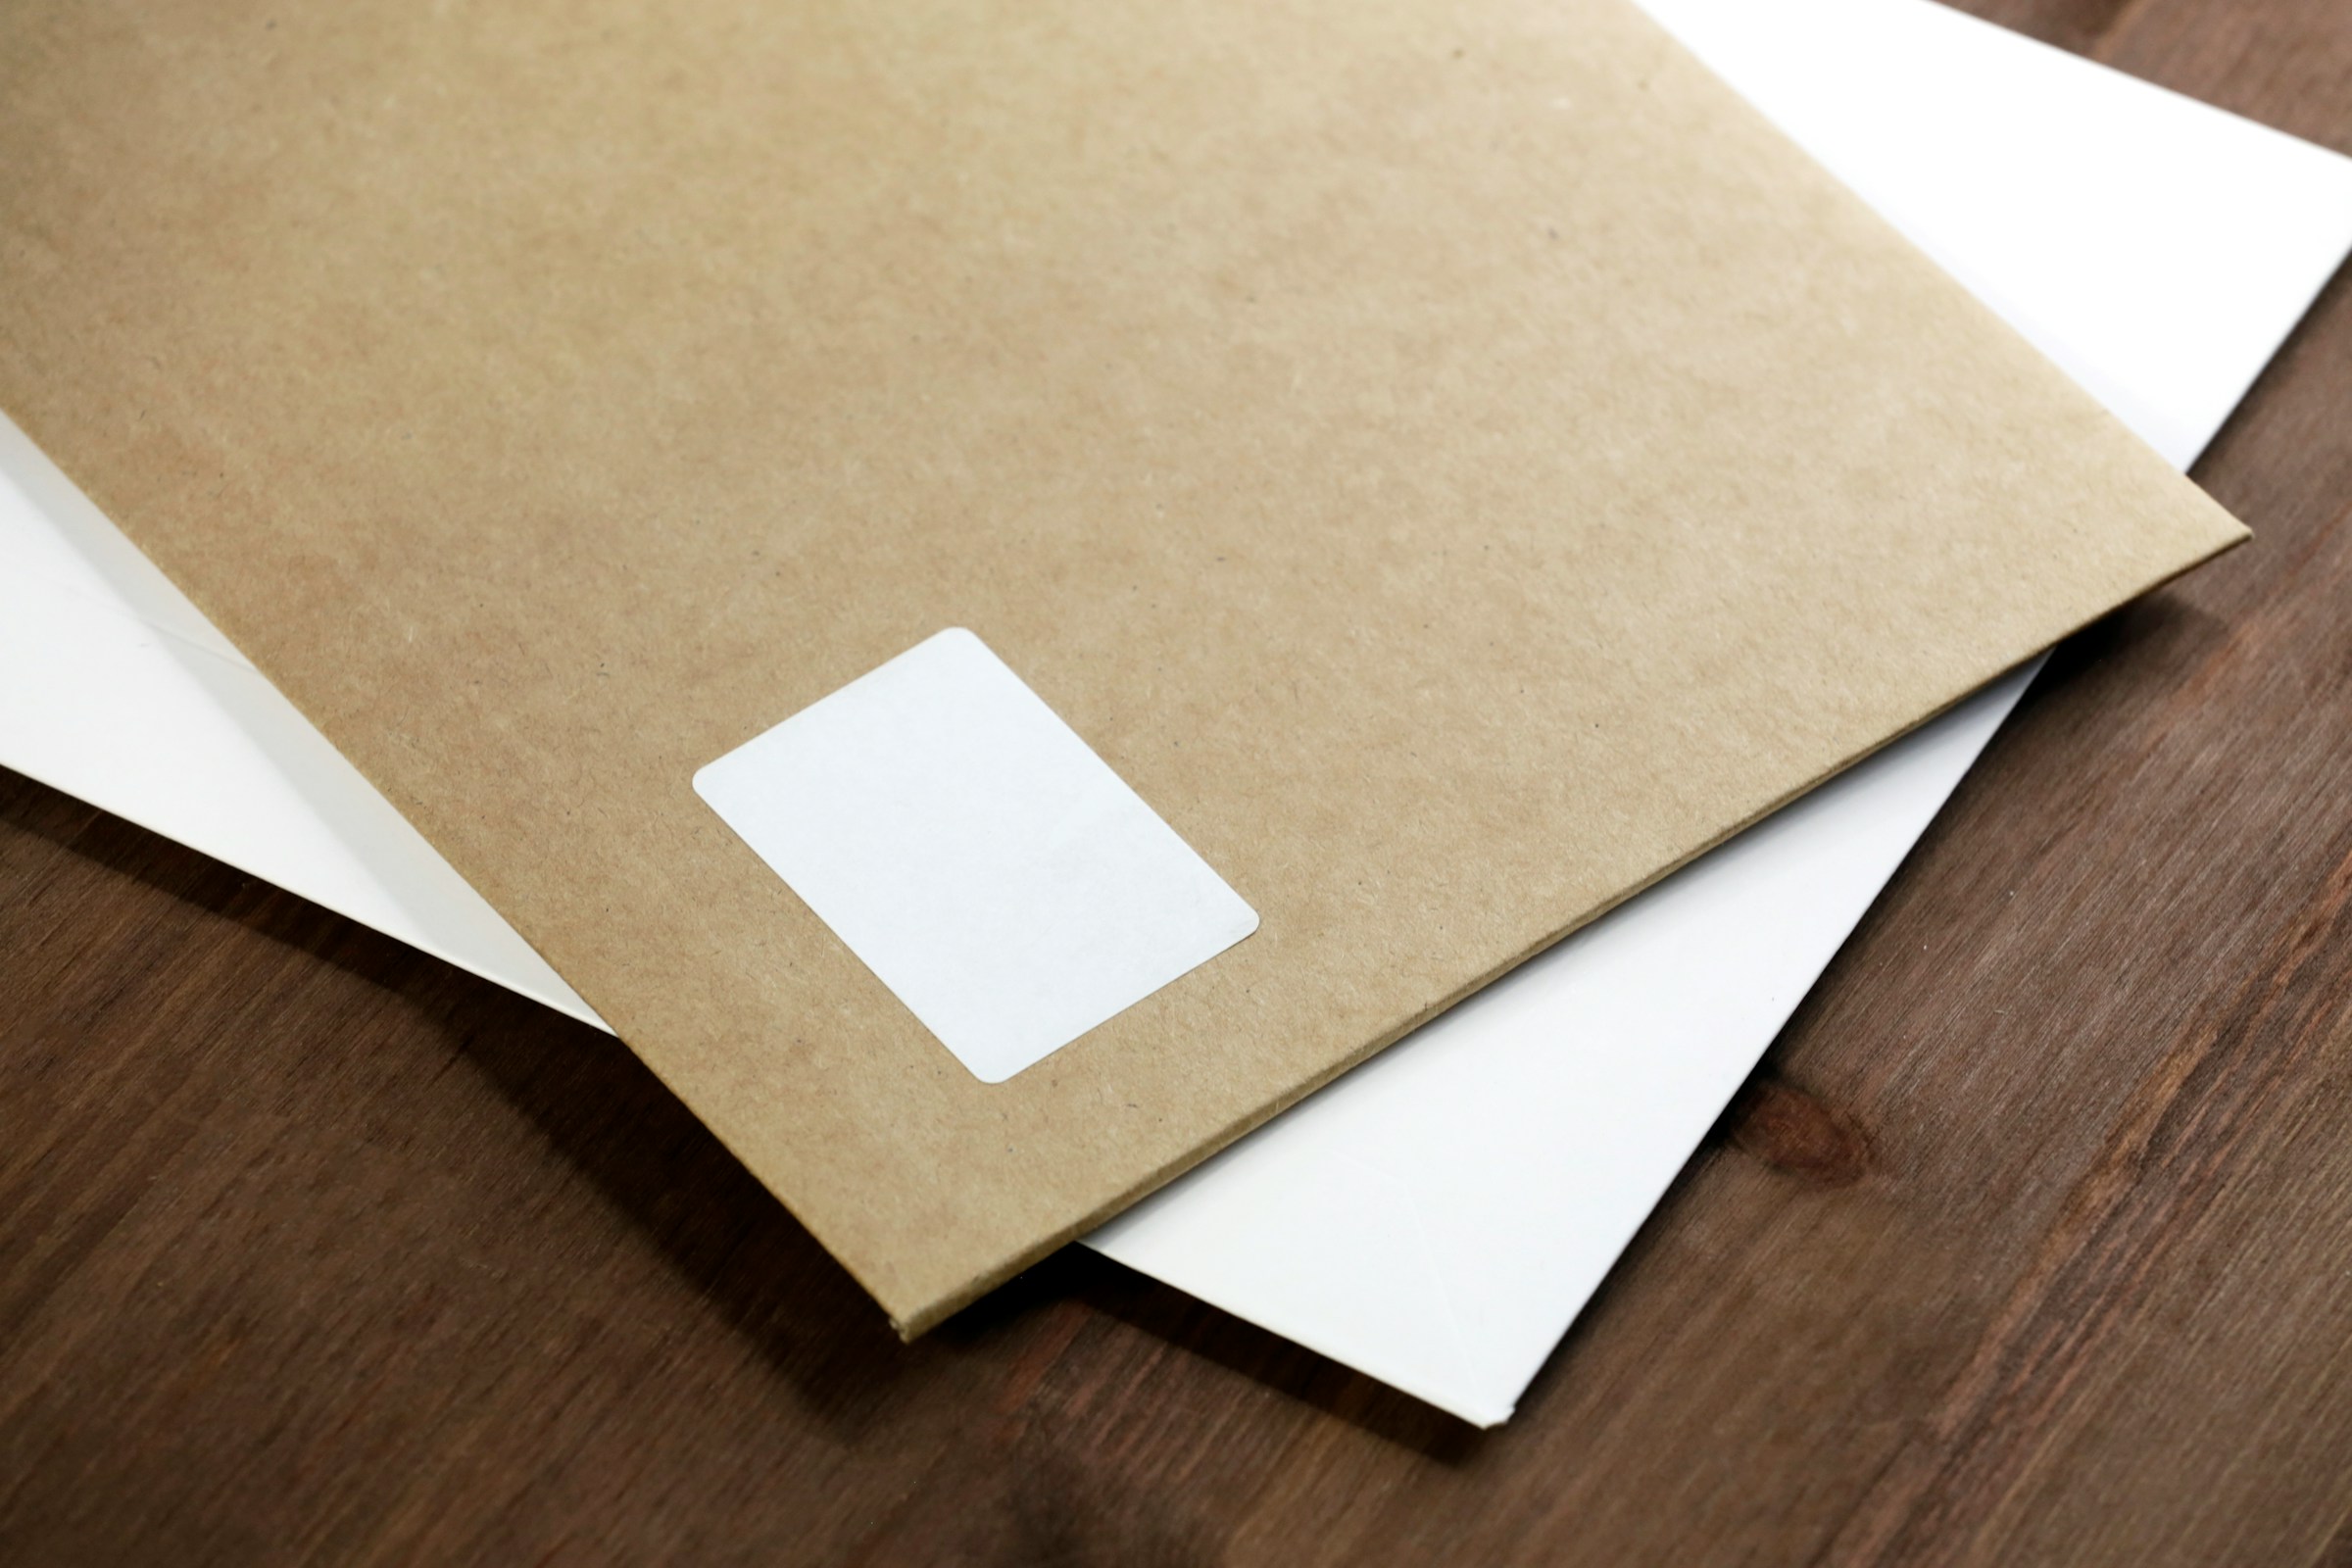 Two envelopes on a table | Source: Unsplash